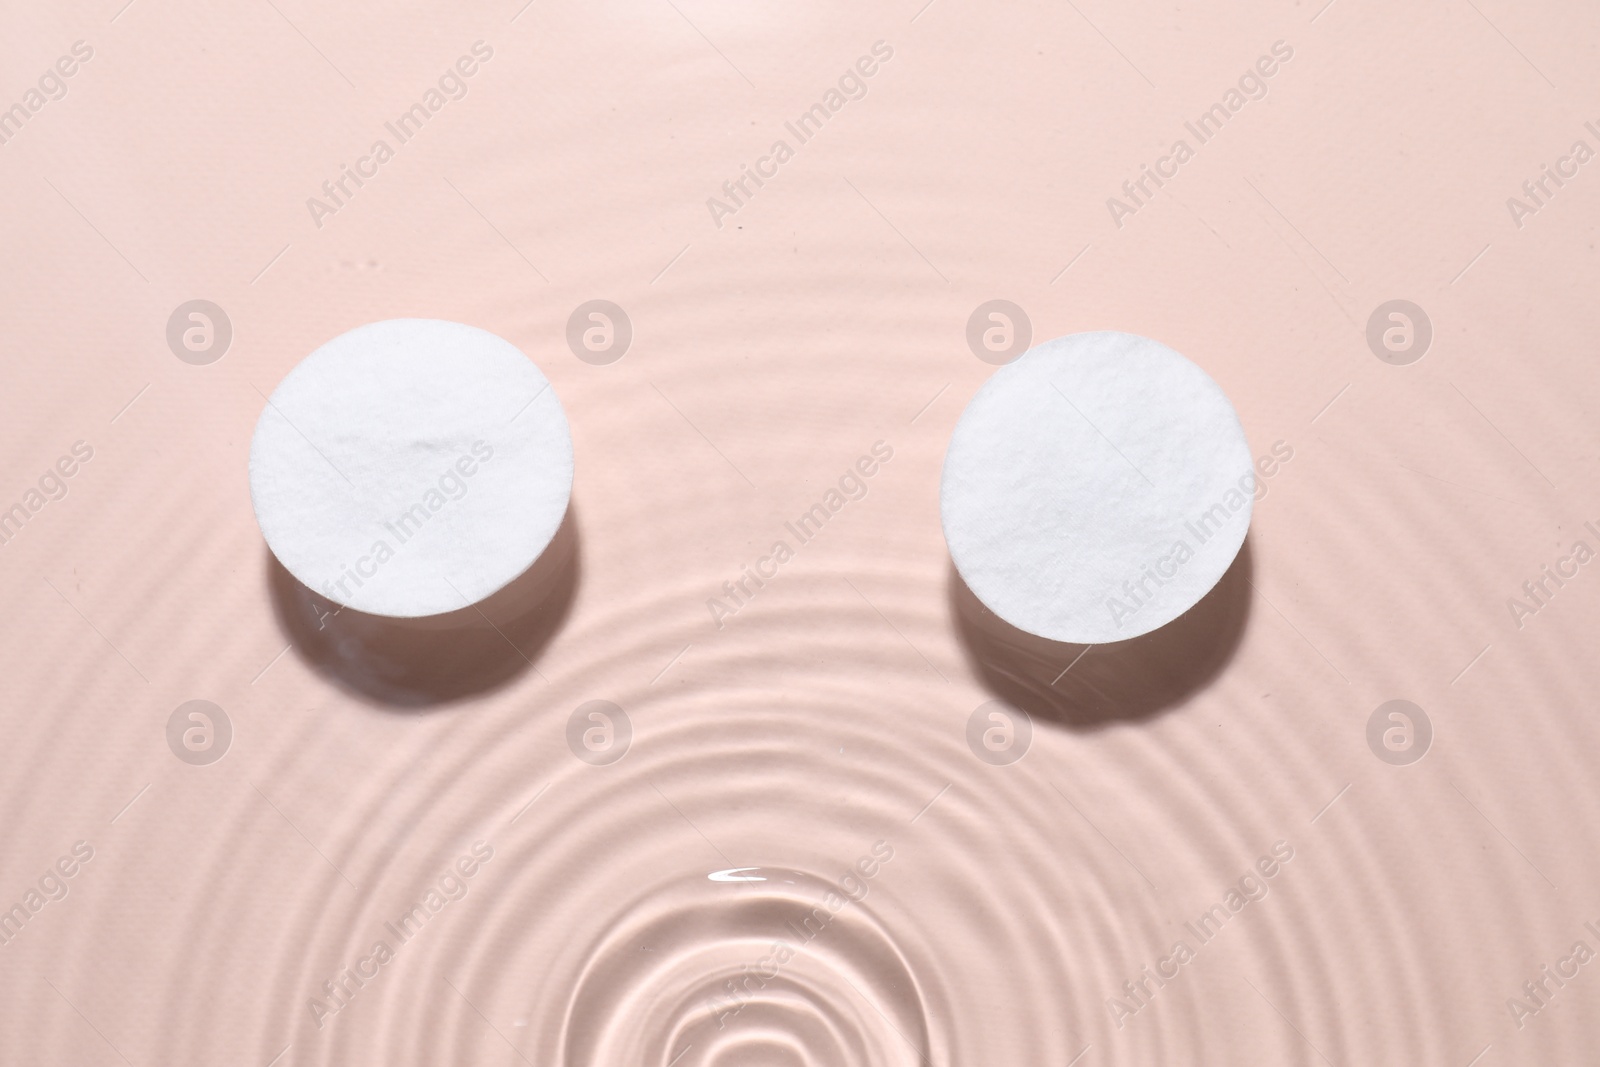 Photo of Cotton pads in micellar water on beige background, top view